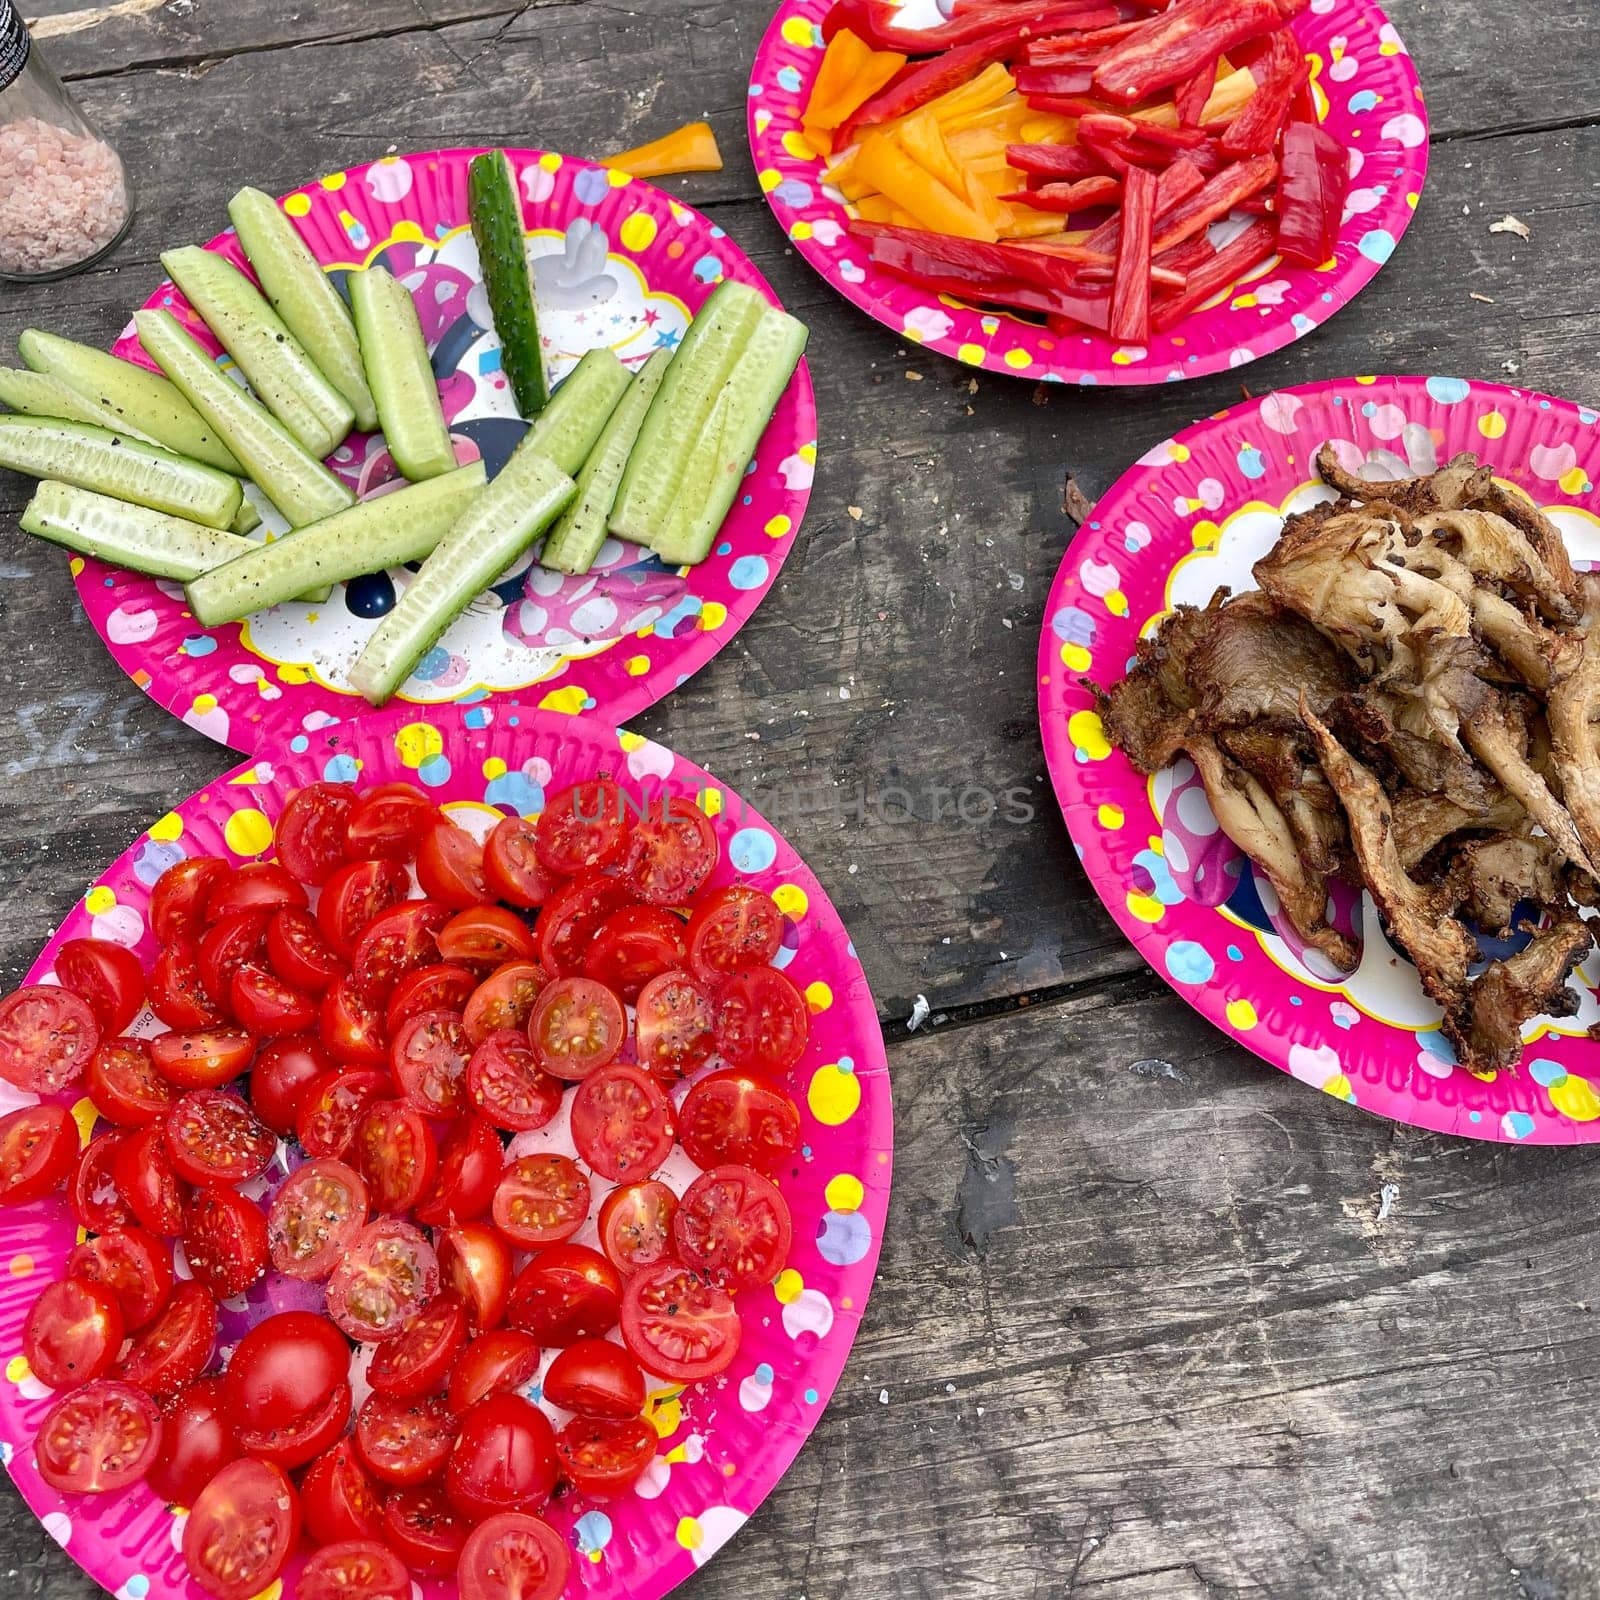 Colorful plates with vegetables and mushrooms on a wooden surface at a picnic. High quality photo